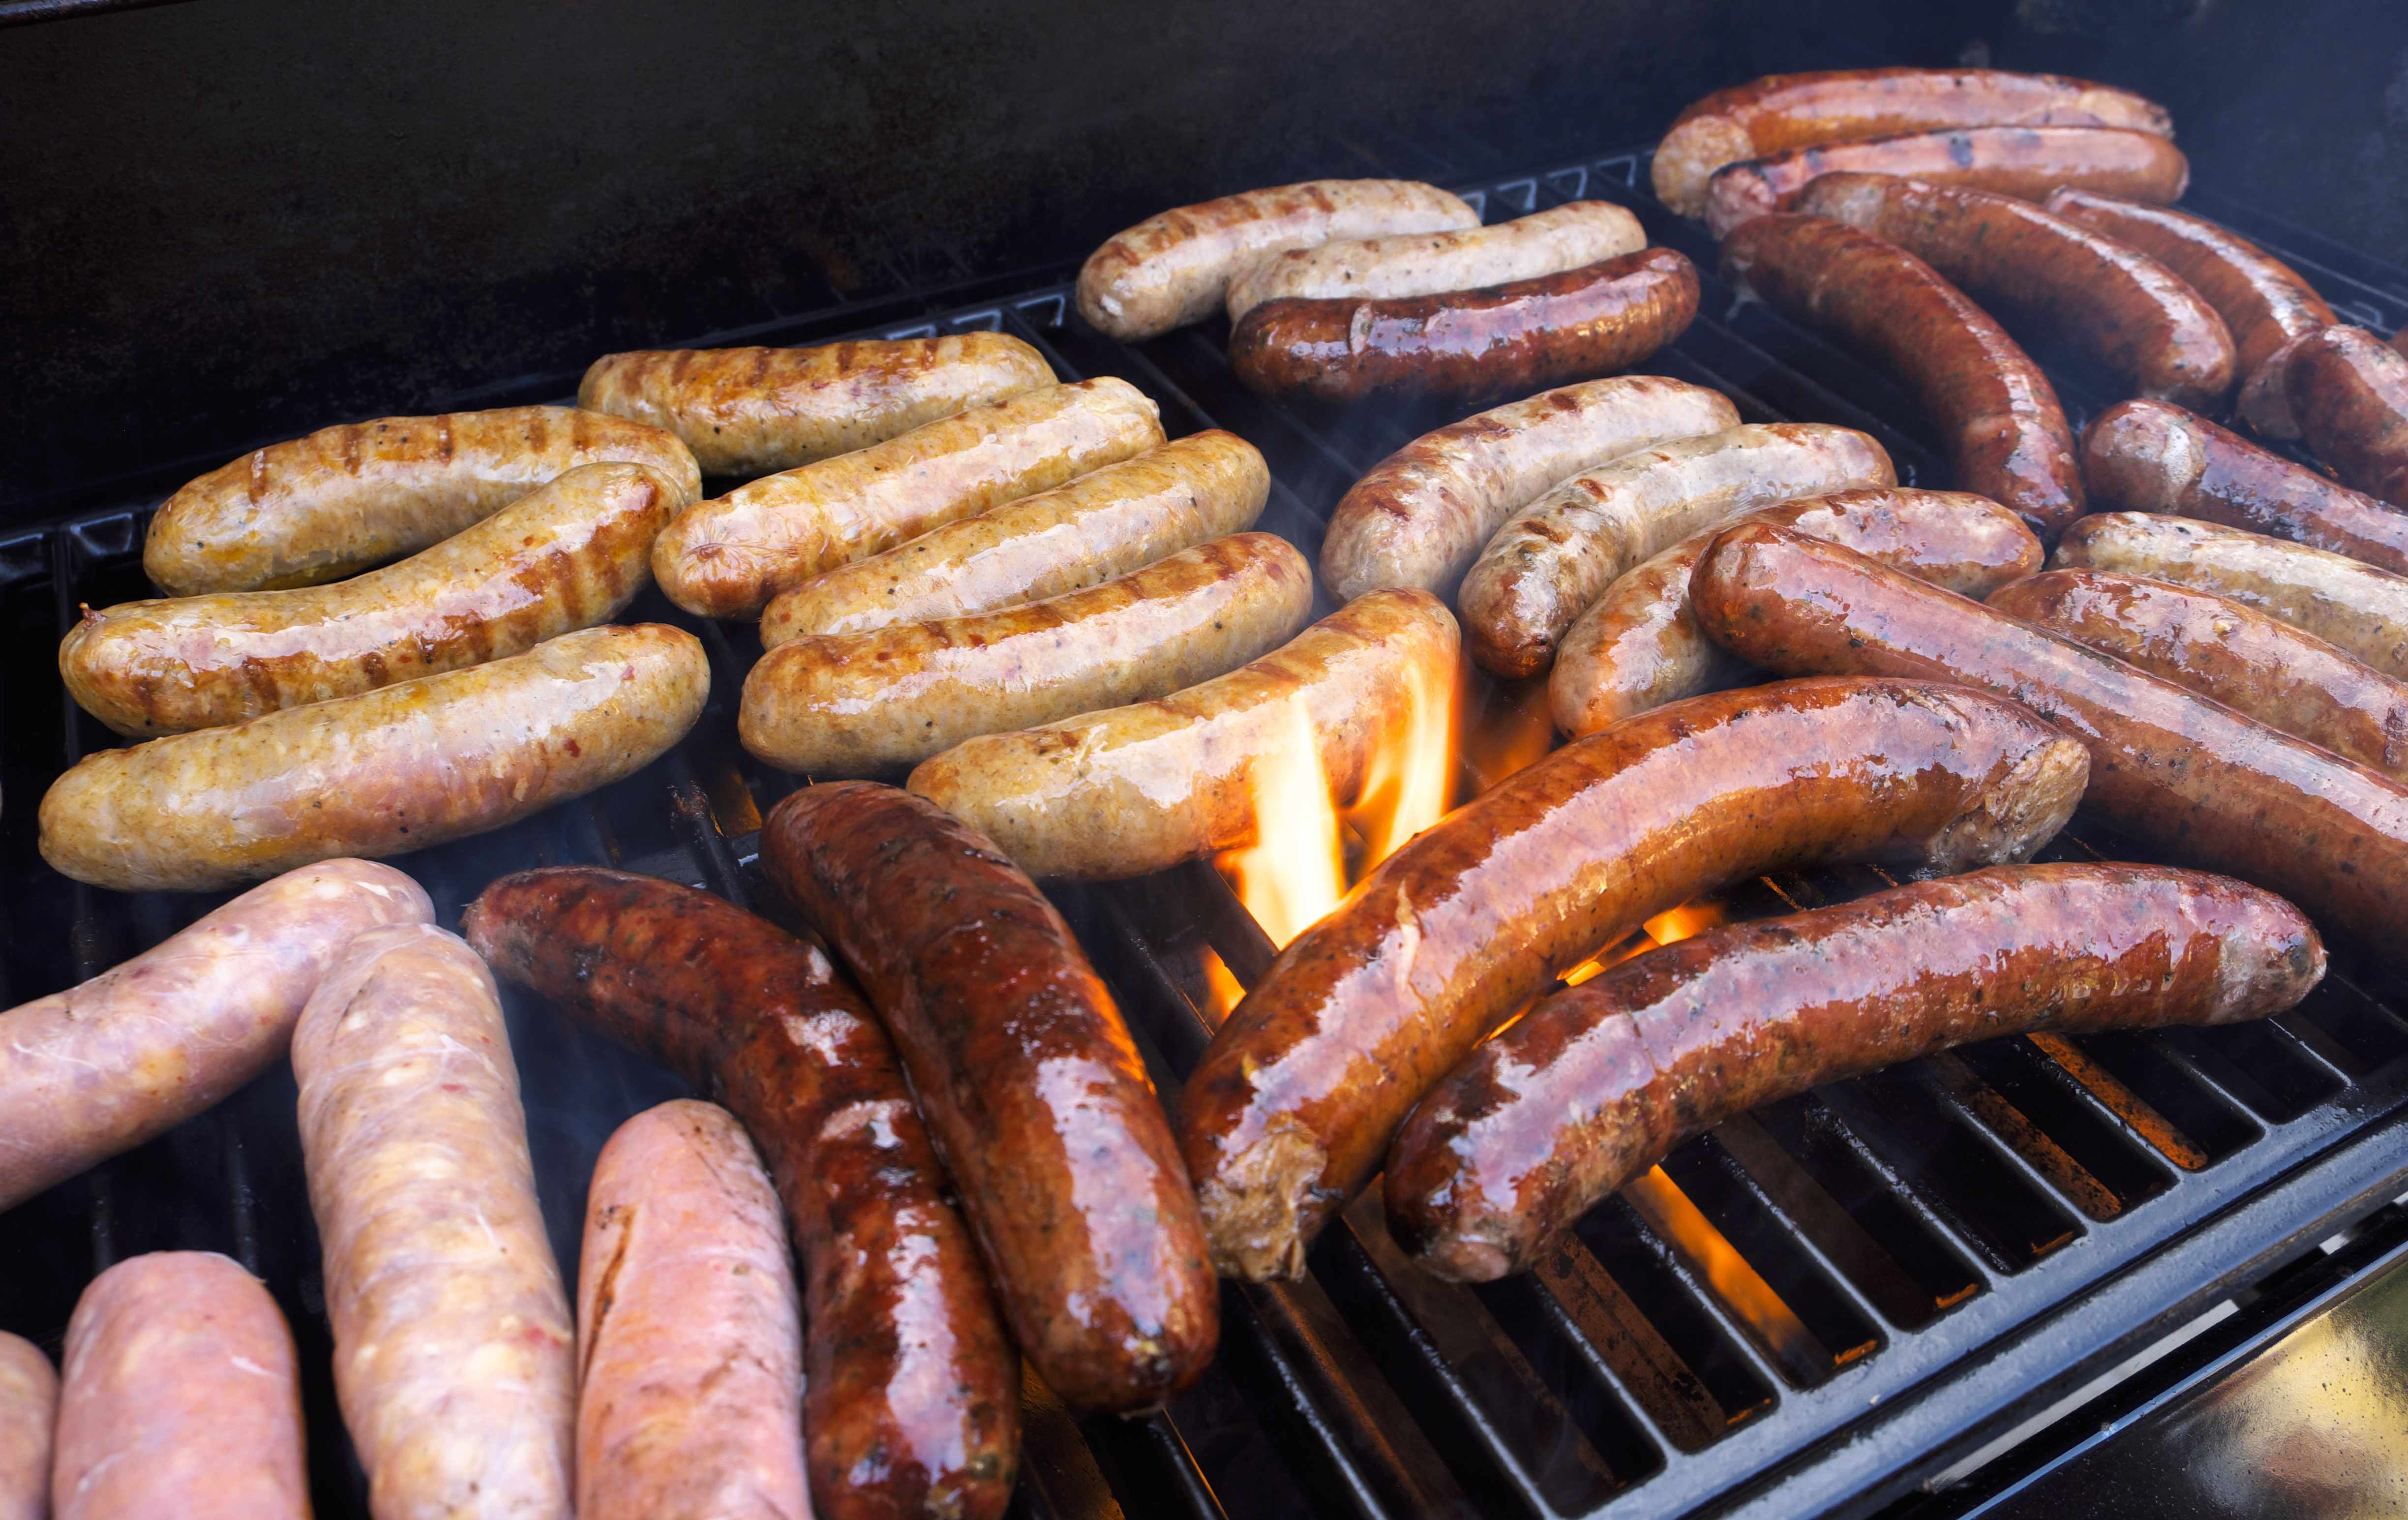 Are Smoked Meats Bad for Your Health?